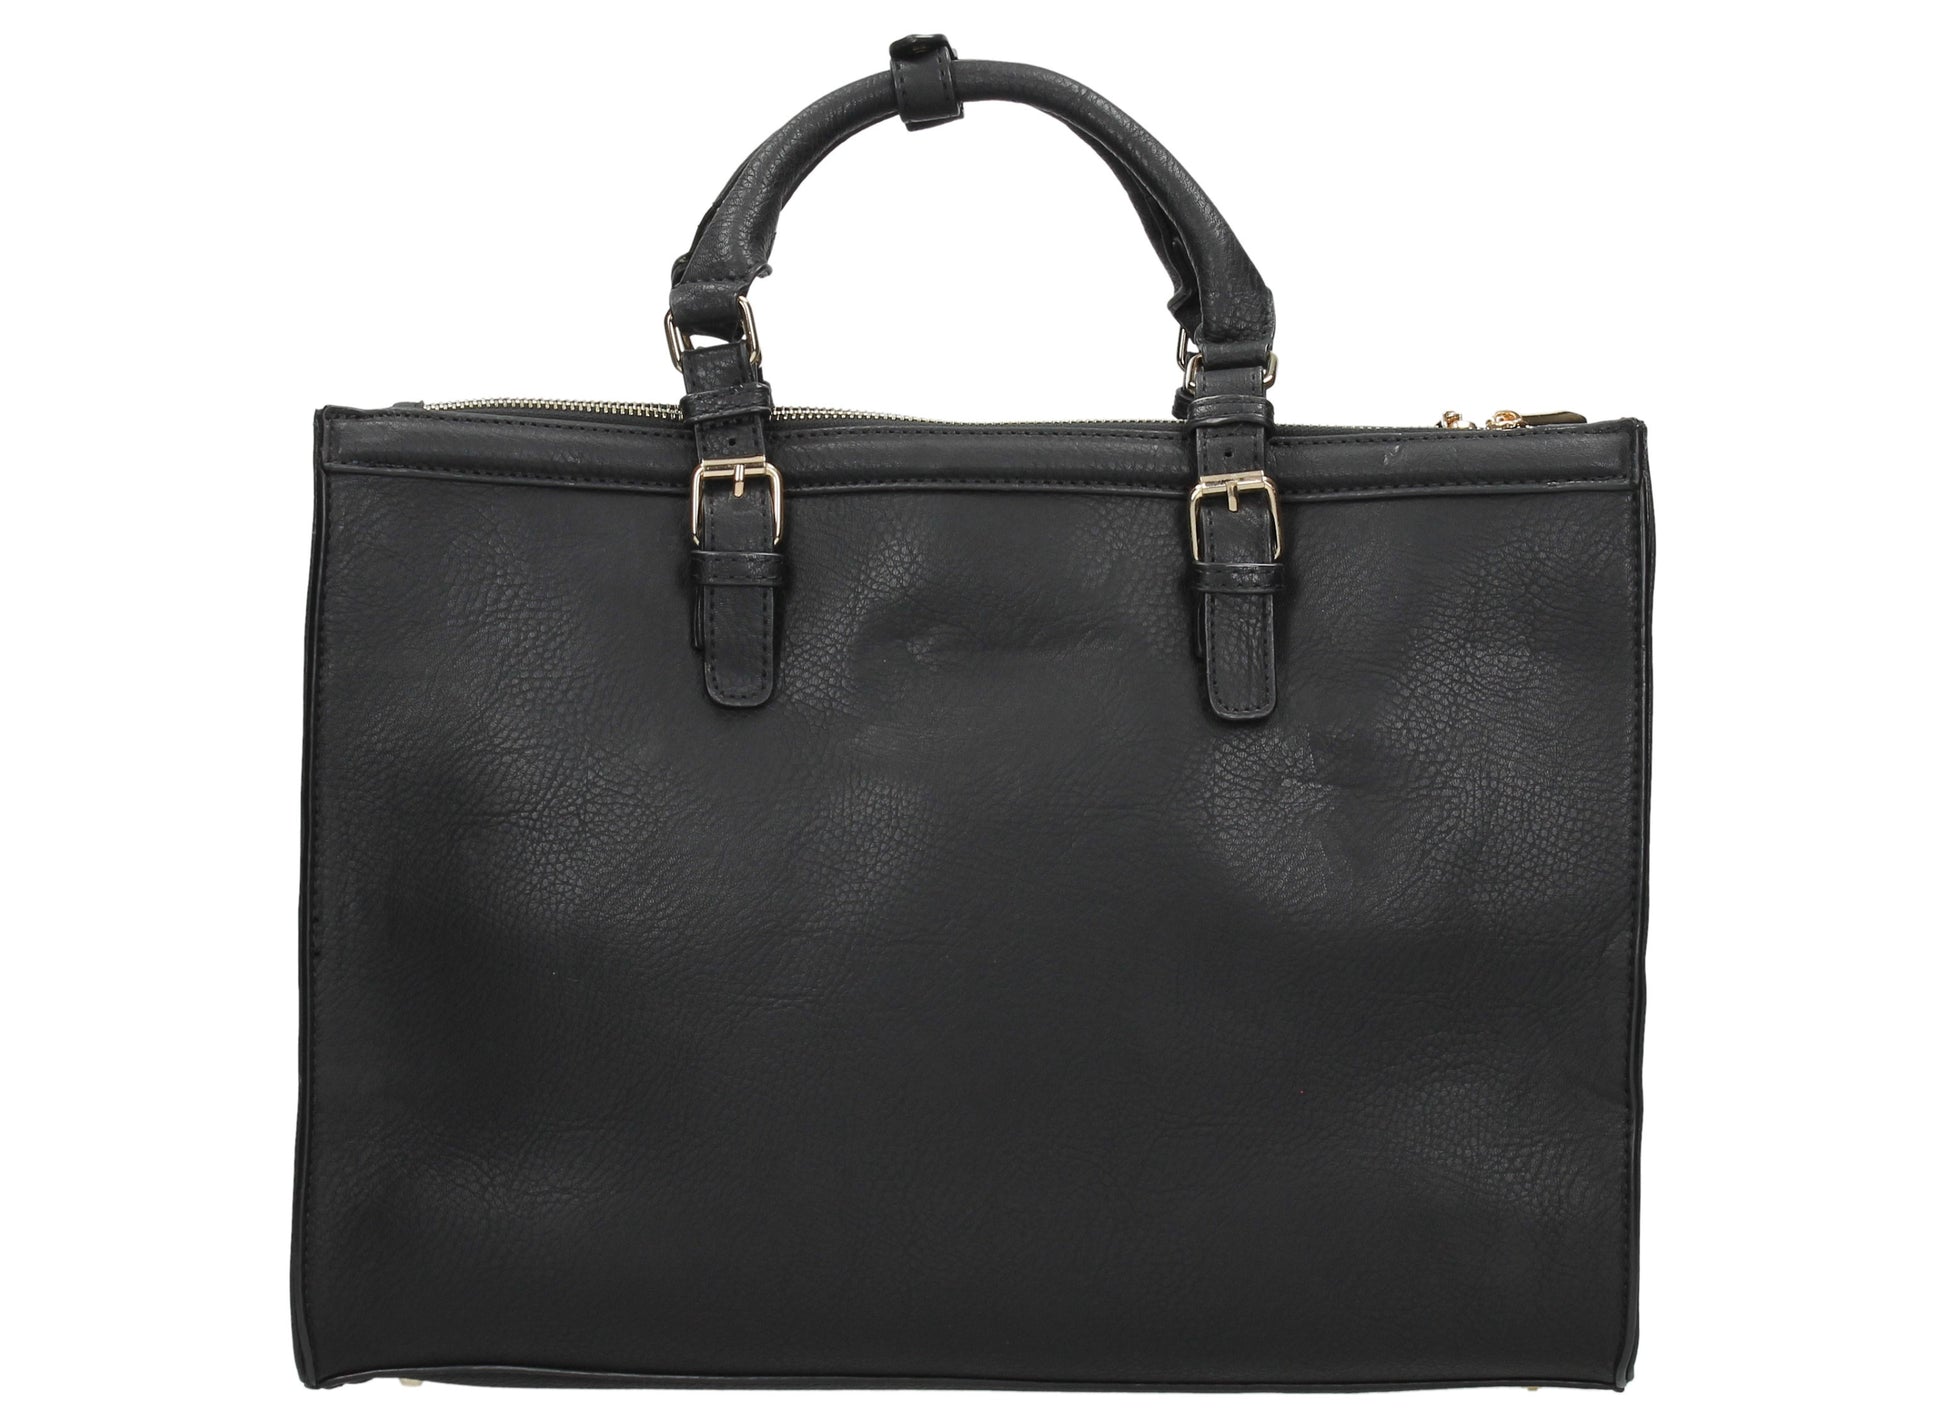 Swanky Swans Marcella Cosmo Handbag BlackPerfect for School, Weddings, Day out!